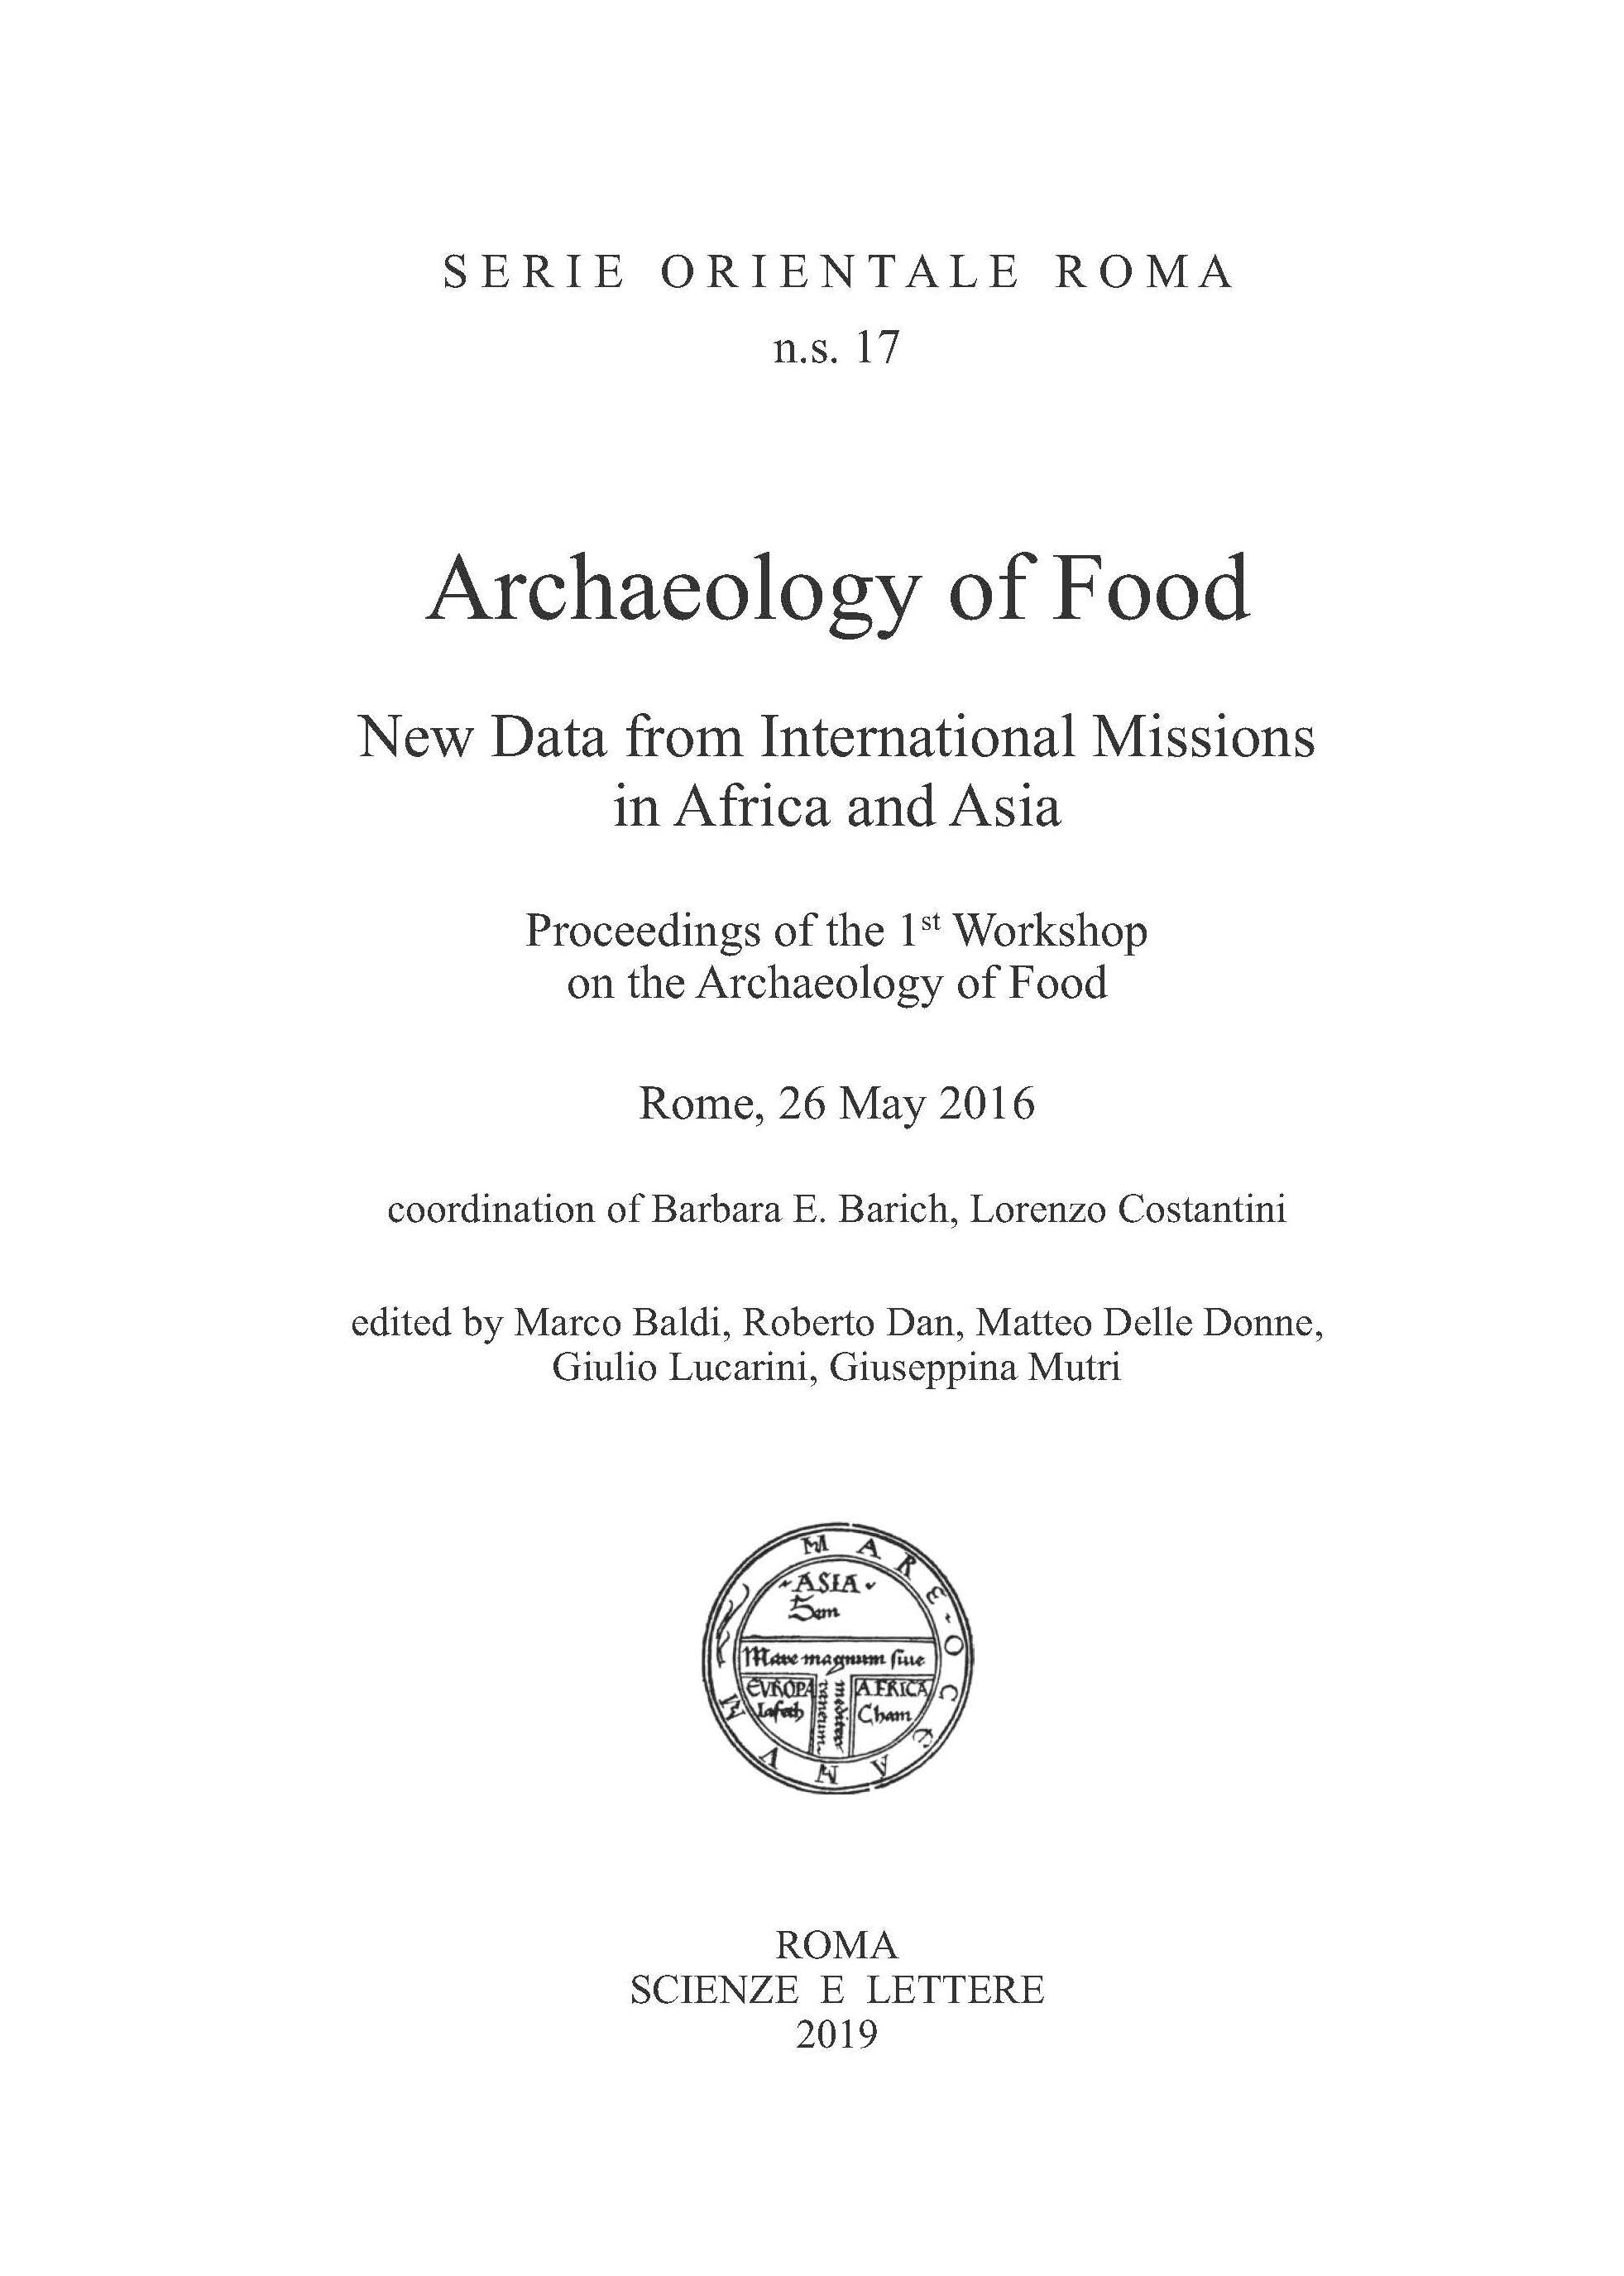 Archaeology of Food. New Data from International Missions in Africa and Asia<br/>
Proceedings of the 1st Workshop
on the Archaeology of Food
Rome, 26 May 2016